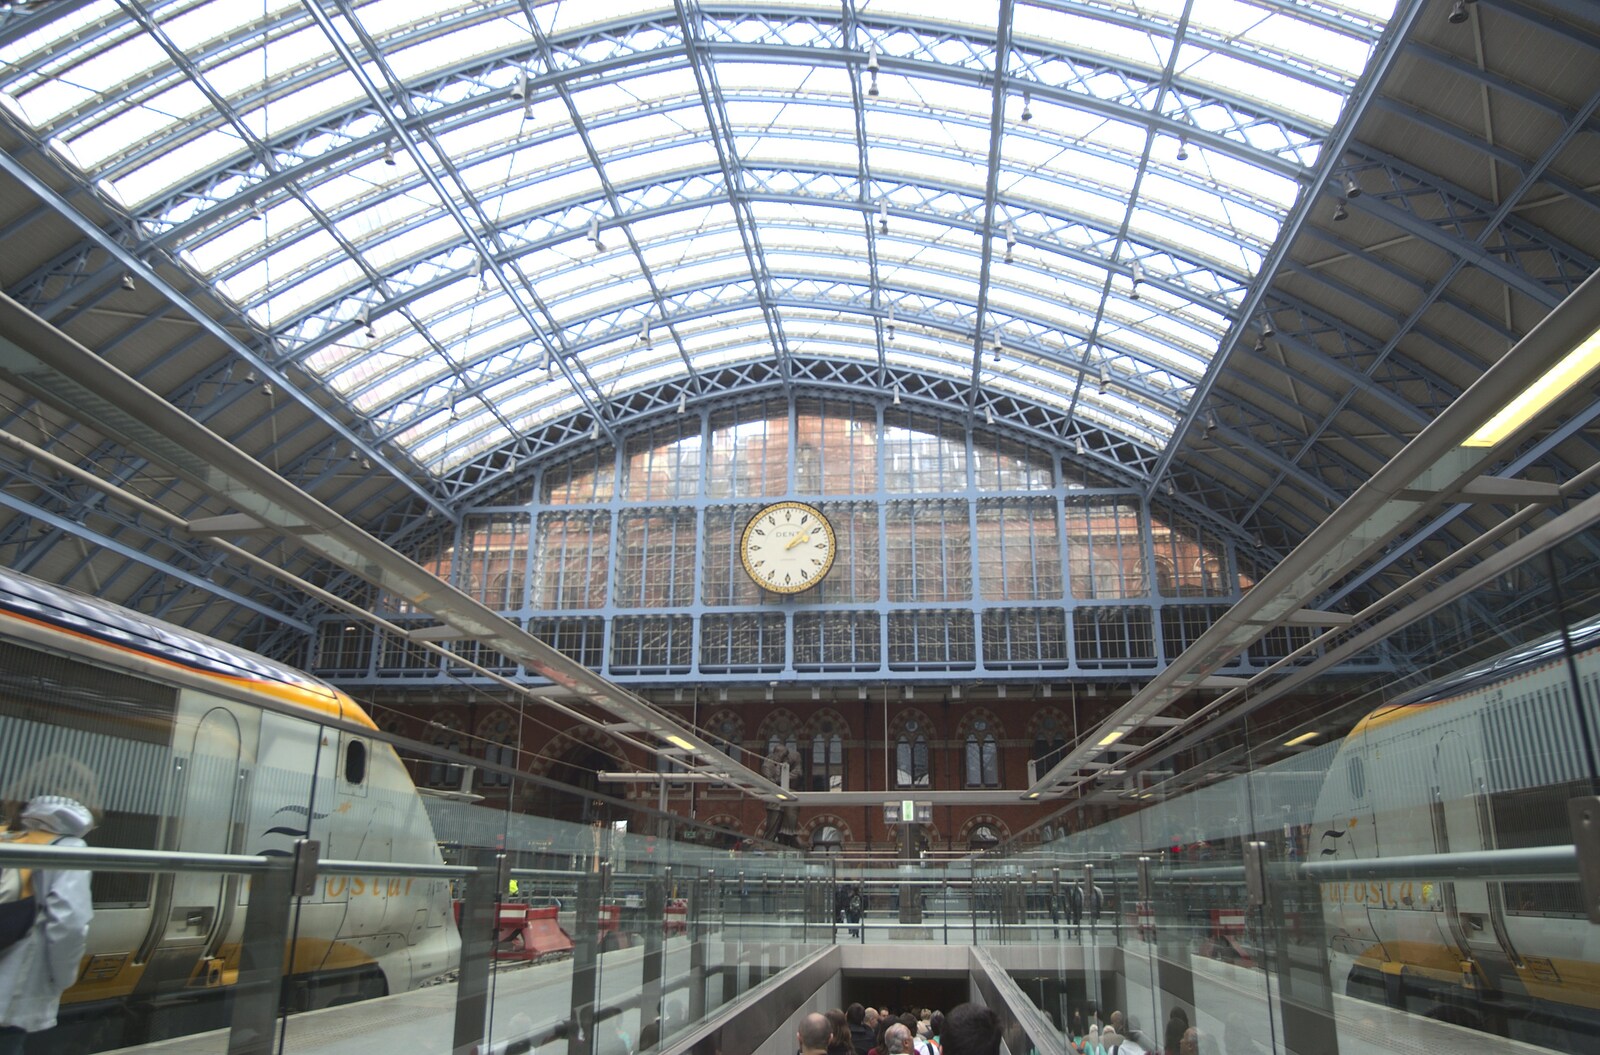 St. Pancras Eurostar terminal from A Day Trip to Brussels, Belgium - 5th April 2009